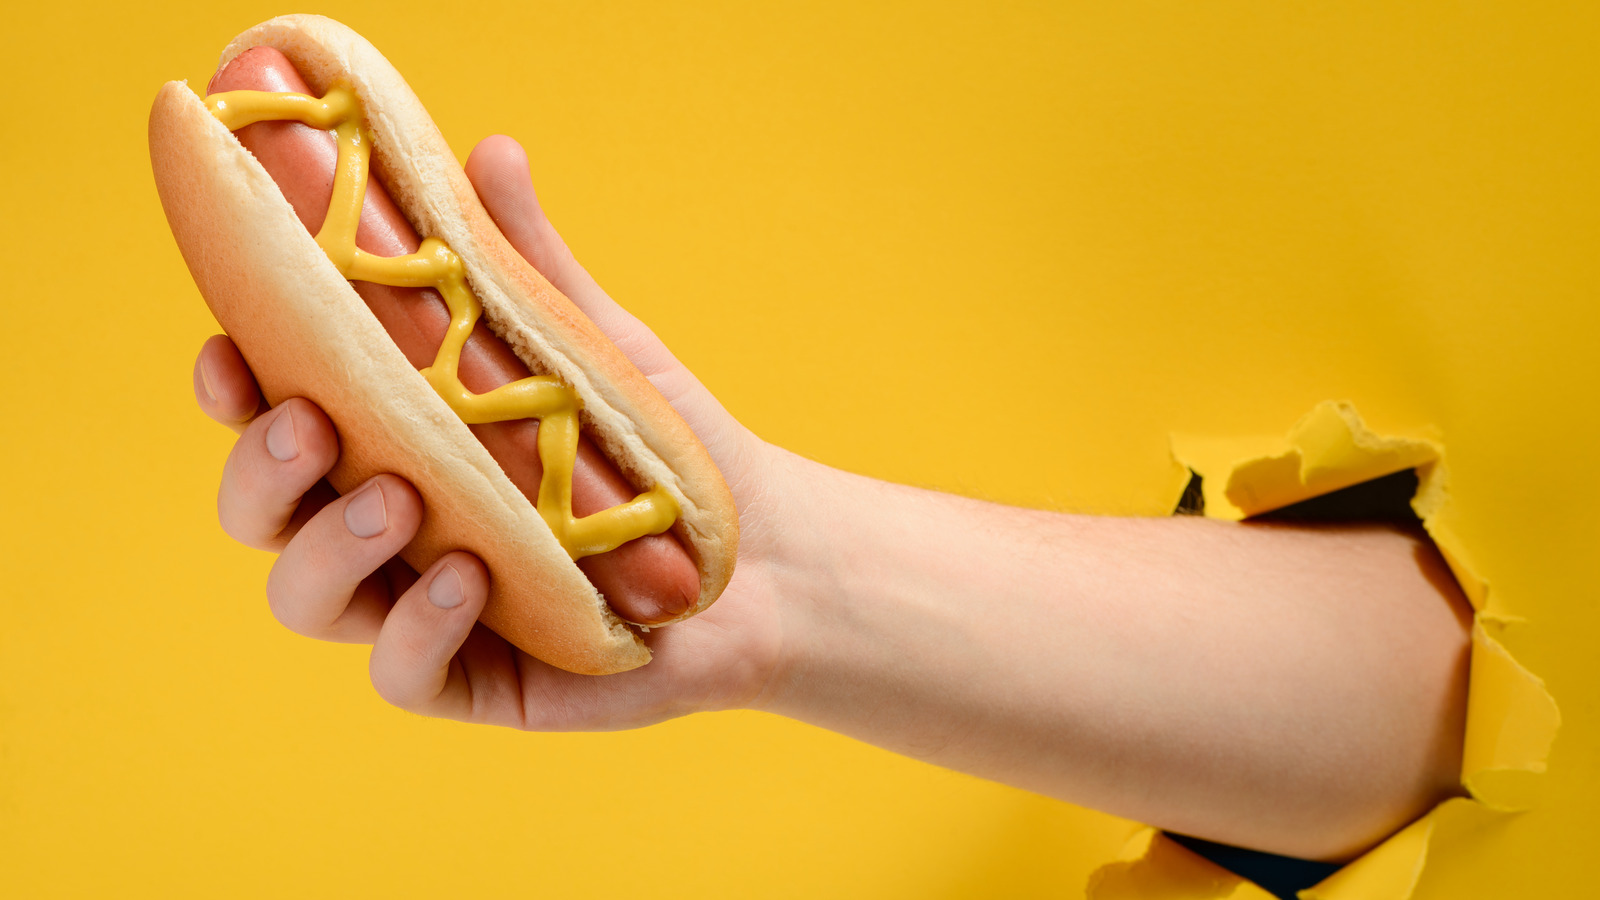 Why You Might Not Want To Eat Hot Dogs While Pregnant